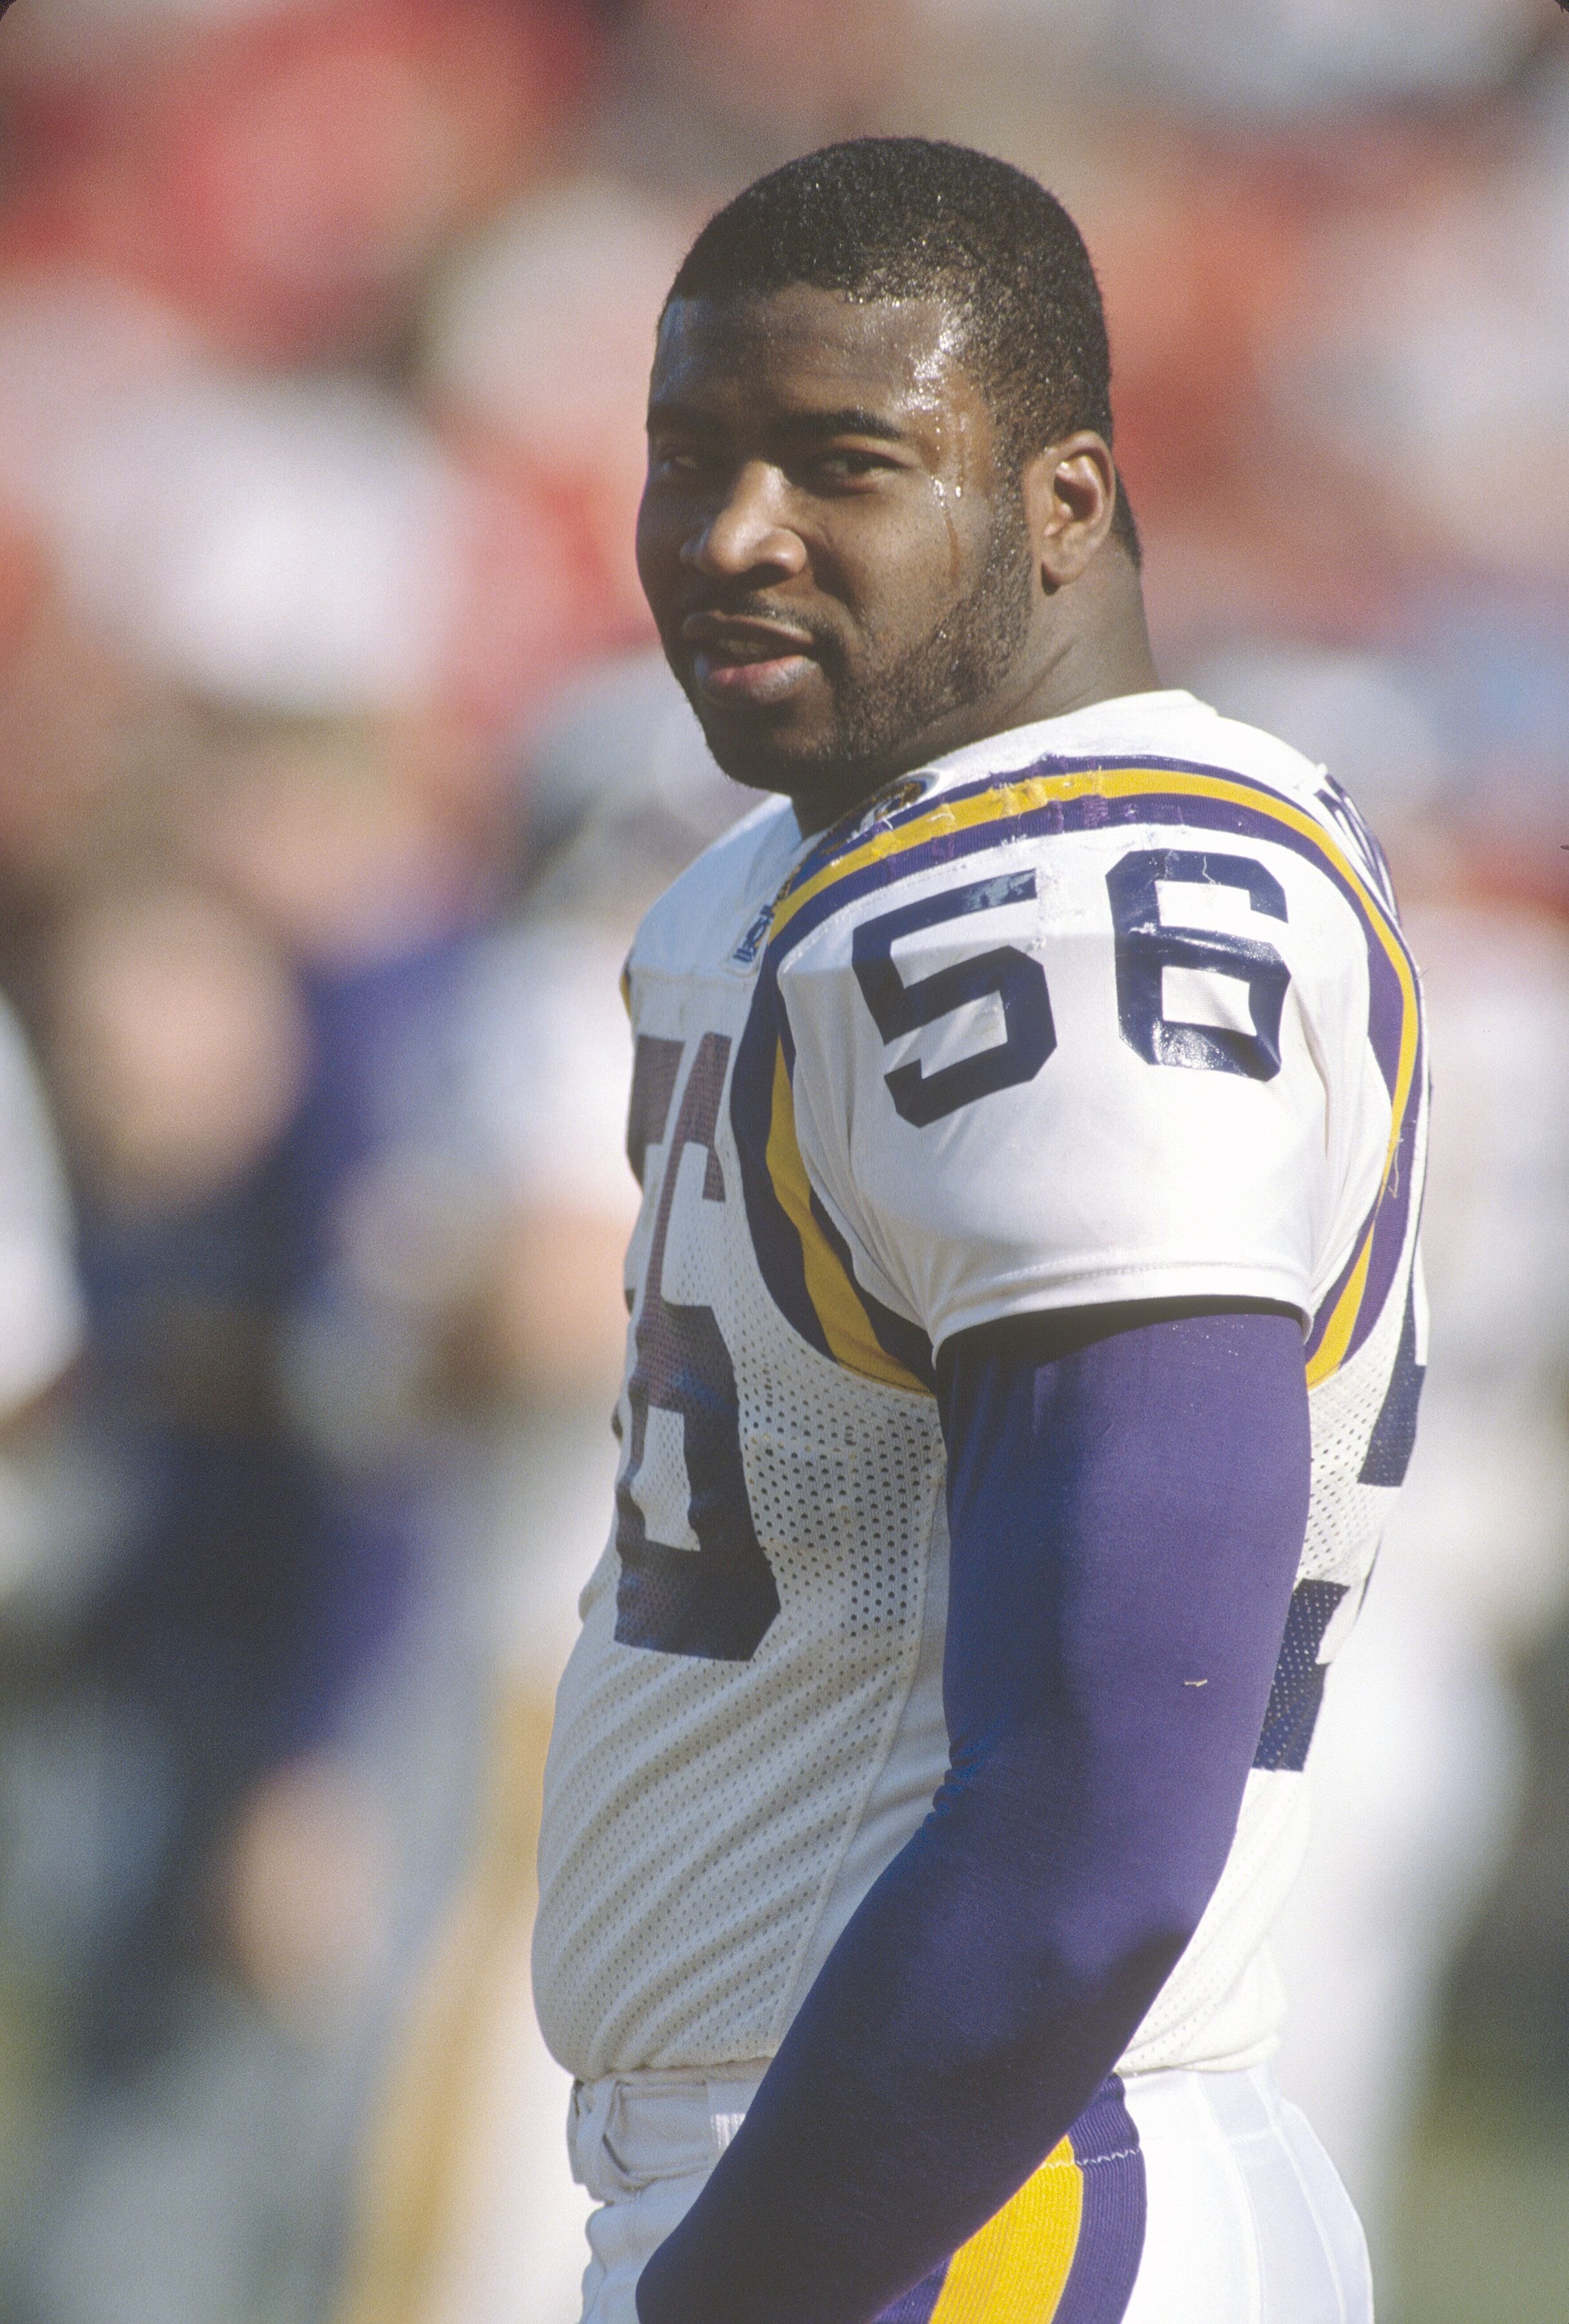  Chris Doleman #56 of the Minnesota Vikings looks on during an NFL football game circa 1992. Doleman played for the Vikings from 1985-93 and in 1999 | Photo: Getty Images